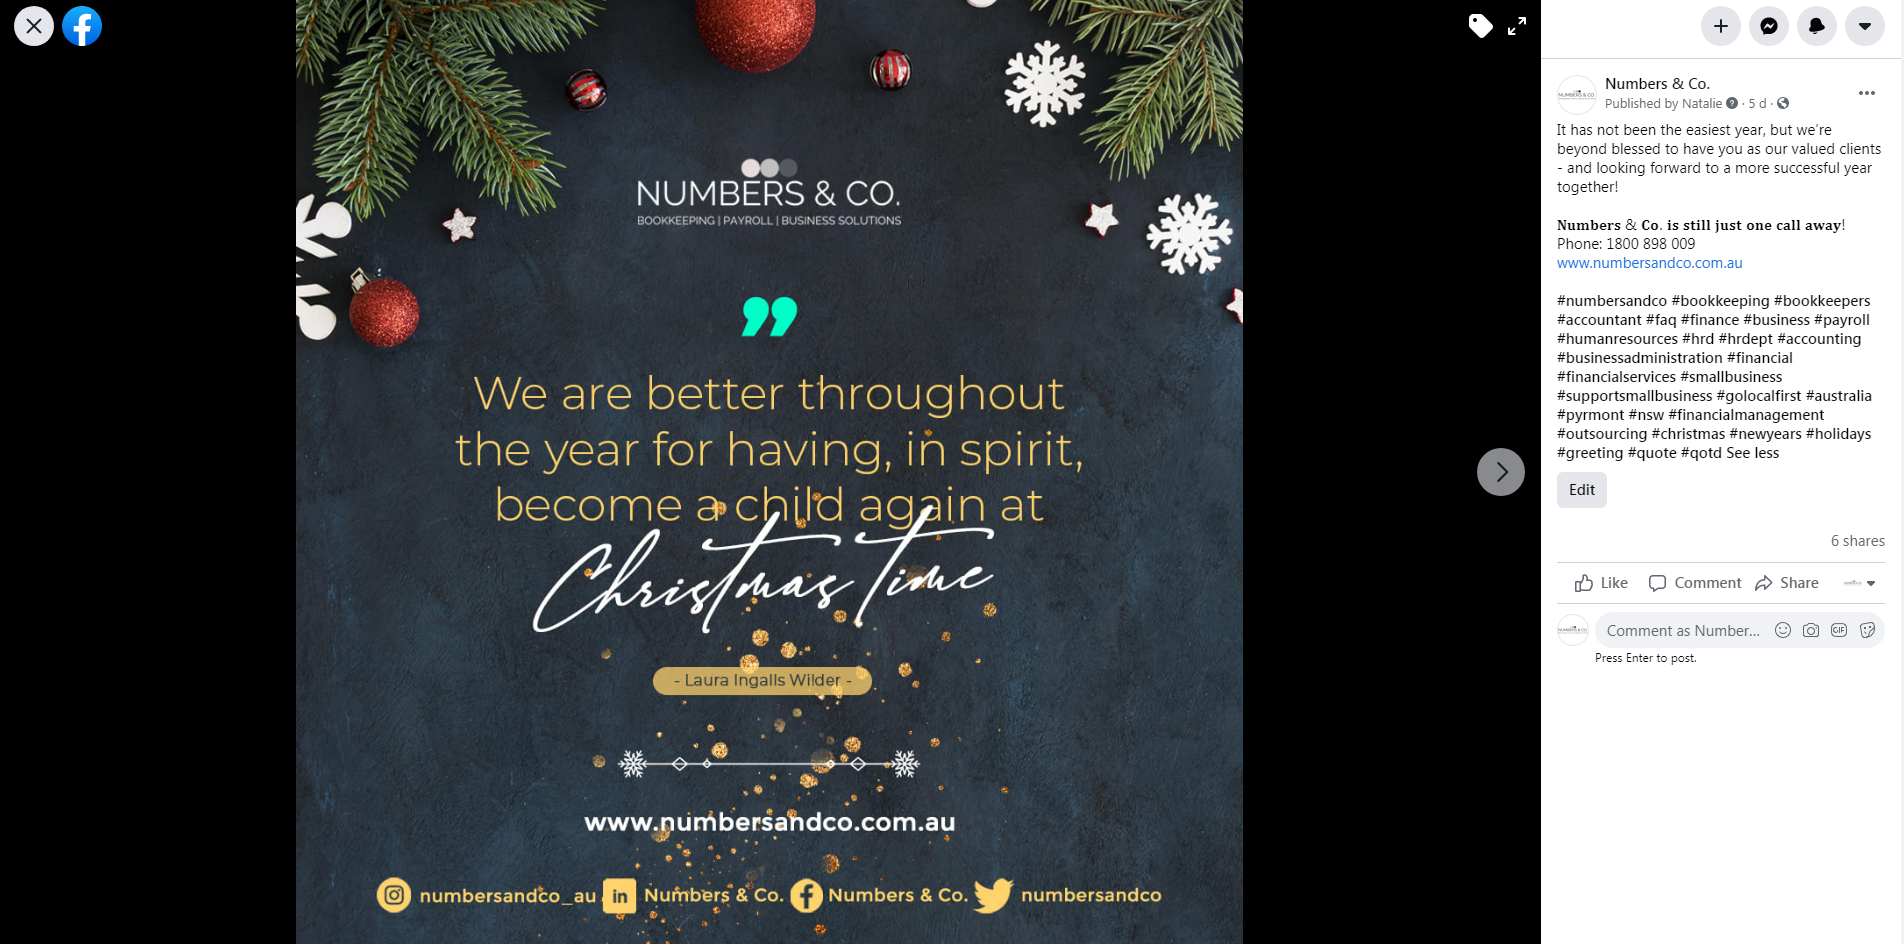 Christmas greeting post - Numbers & Co. - Top4 Marketing